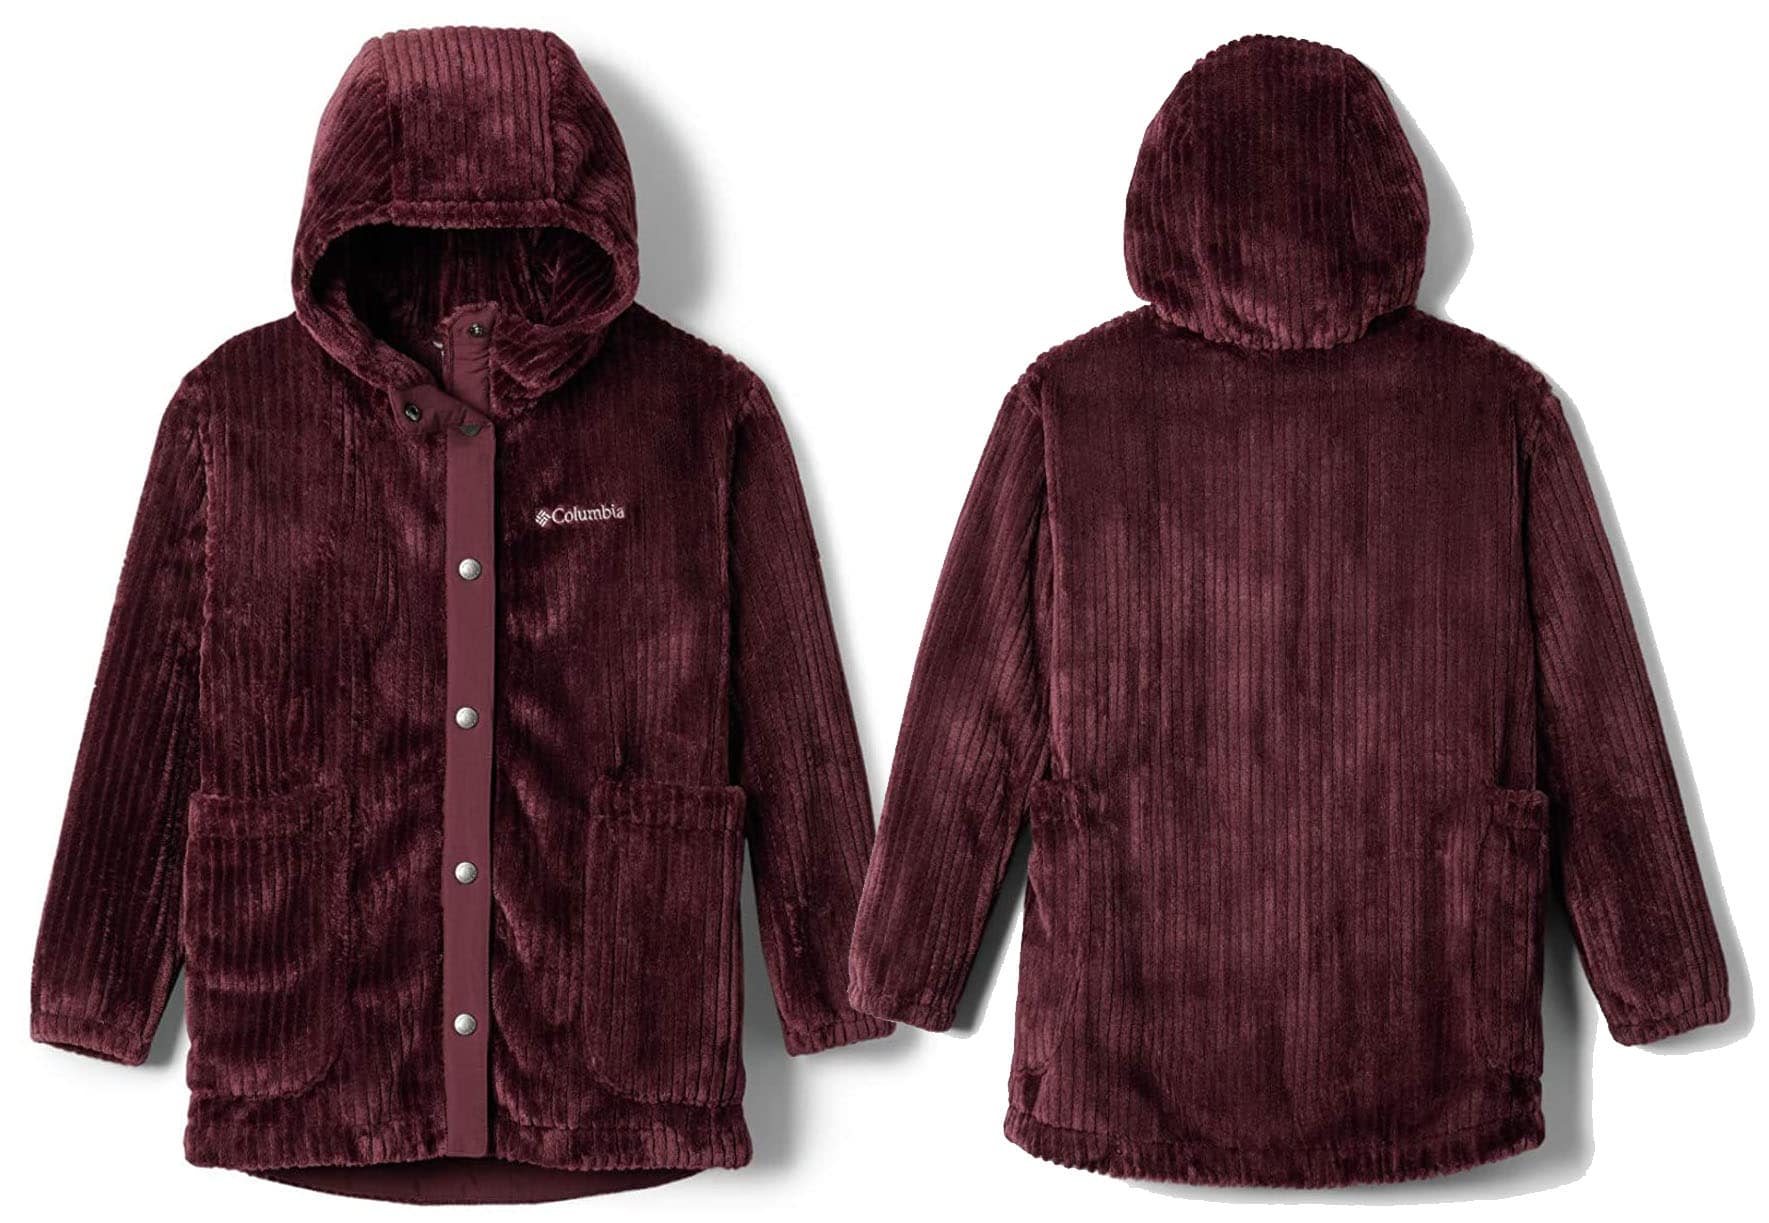 Pretty and comfy, the Fire Side jacket features velvety soft fleece inside and out